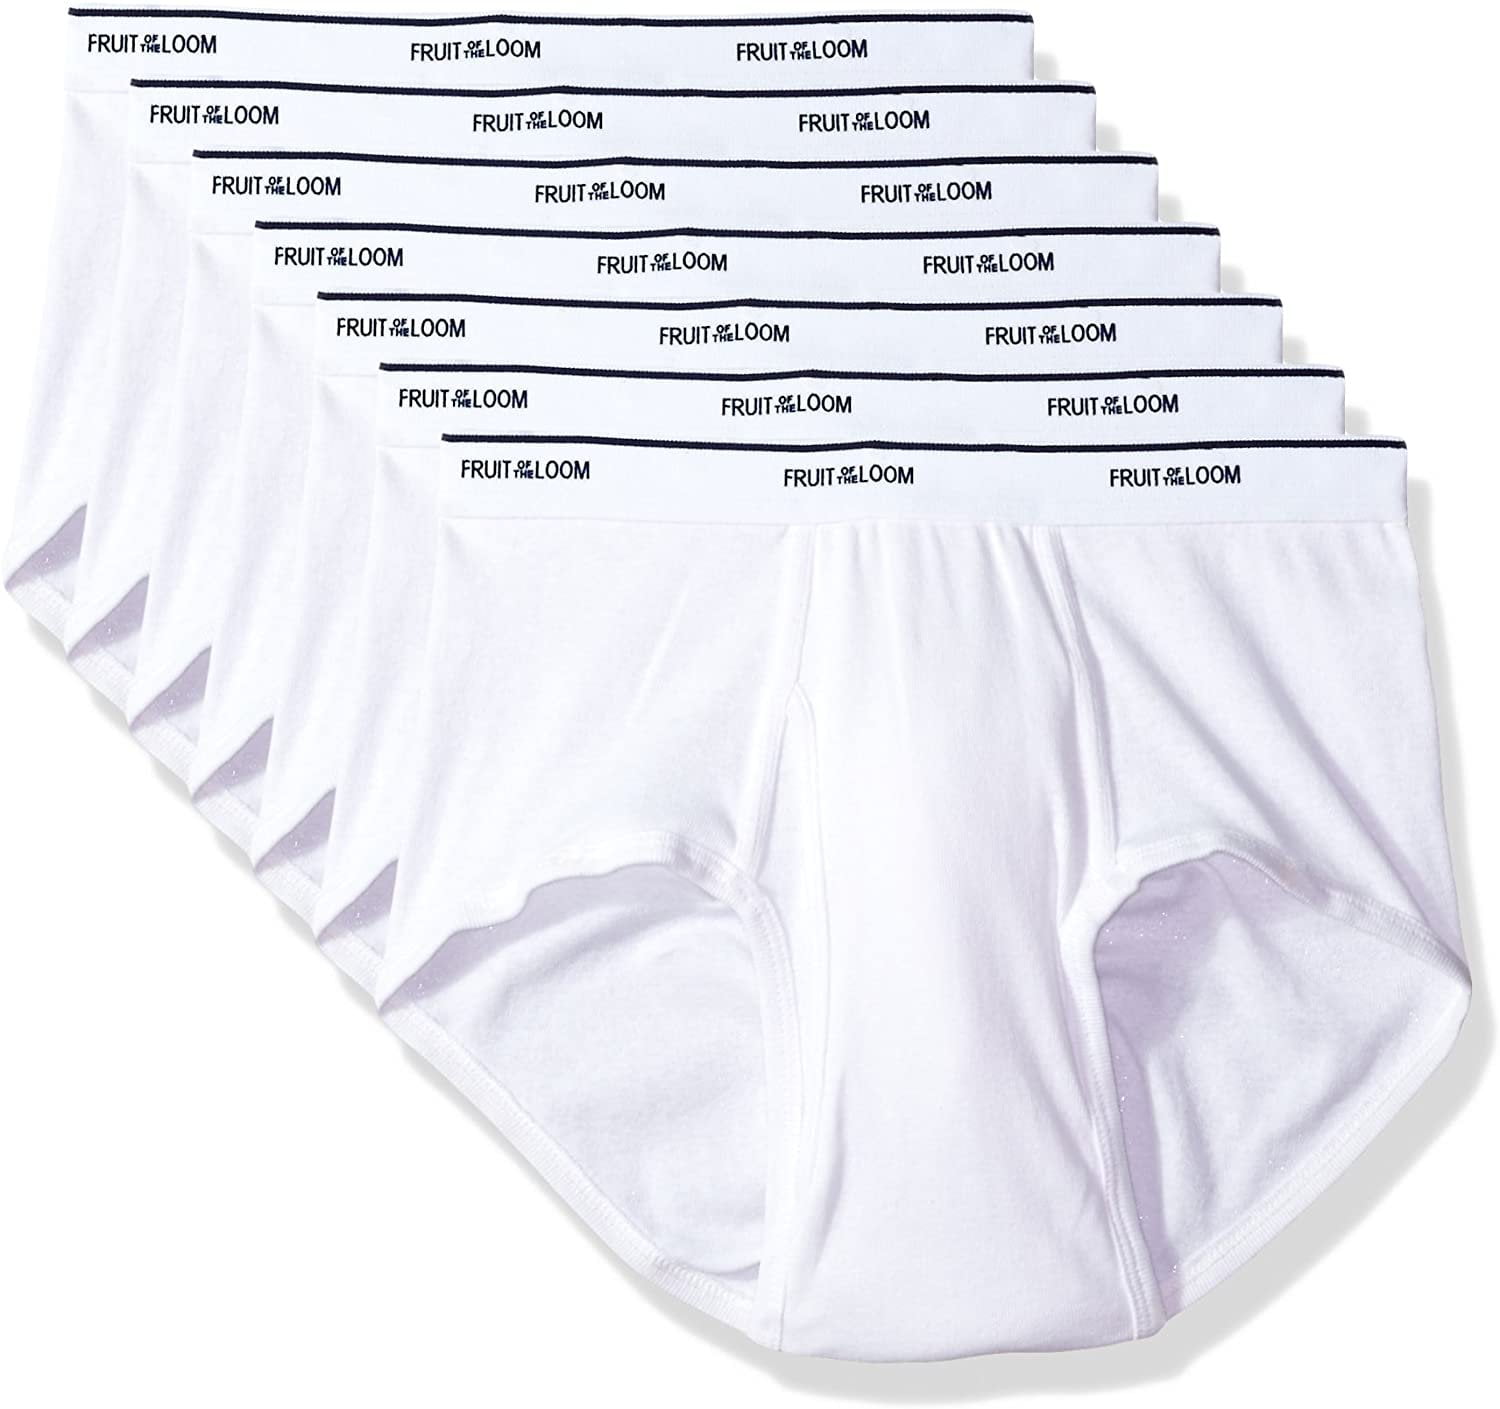 Boys Fruit Of The Loom Briefs Size Chart